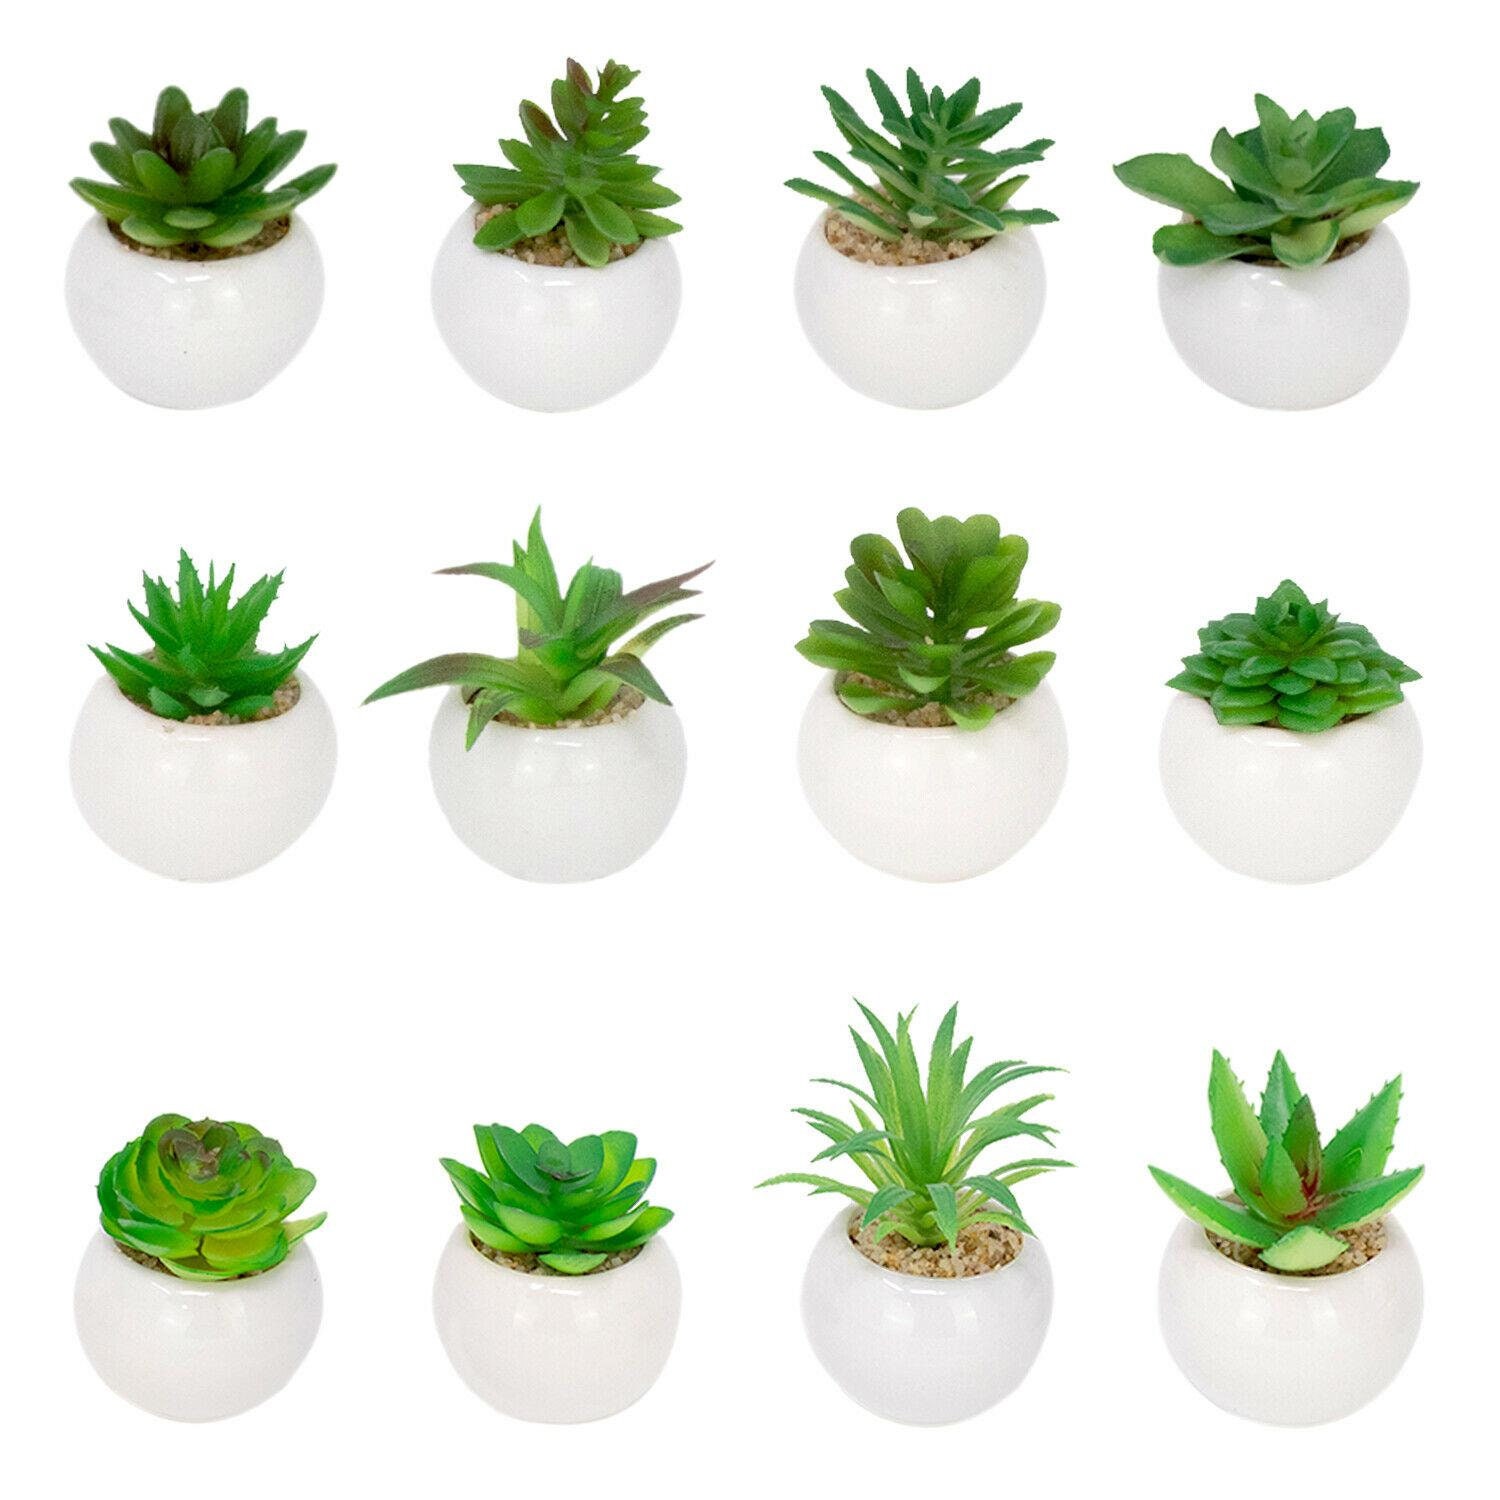 Set of 6 Orange Terracotta Pots Nubry Mini Fake Plants in Terrine Pots Artificial Small Succulents Potted Faux Assorted Lifelike Plants for Home Office Desk Decor 